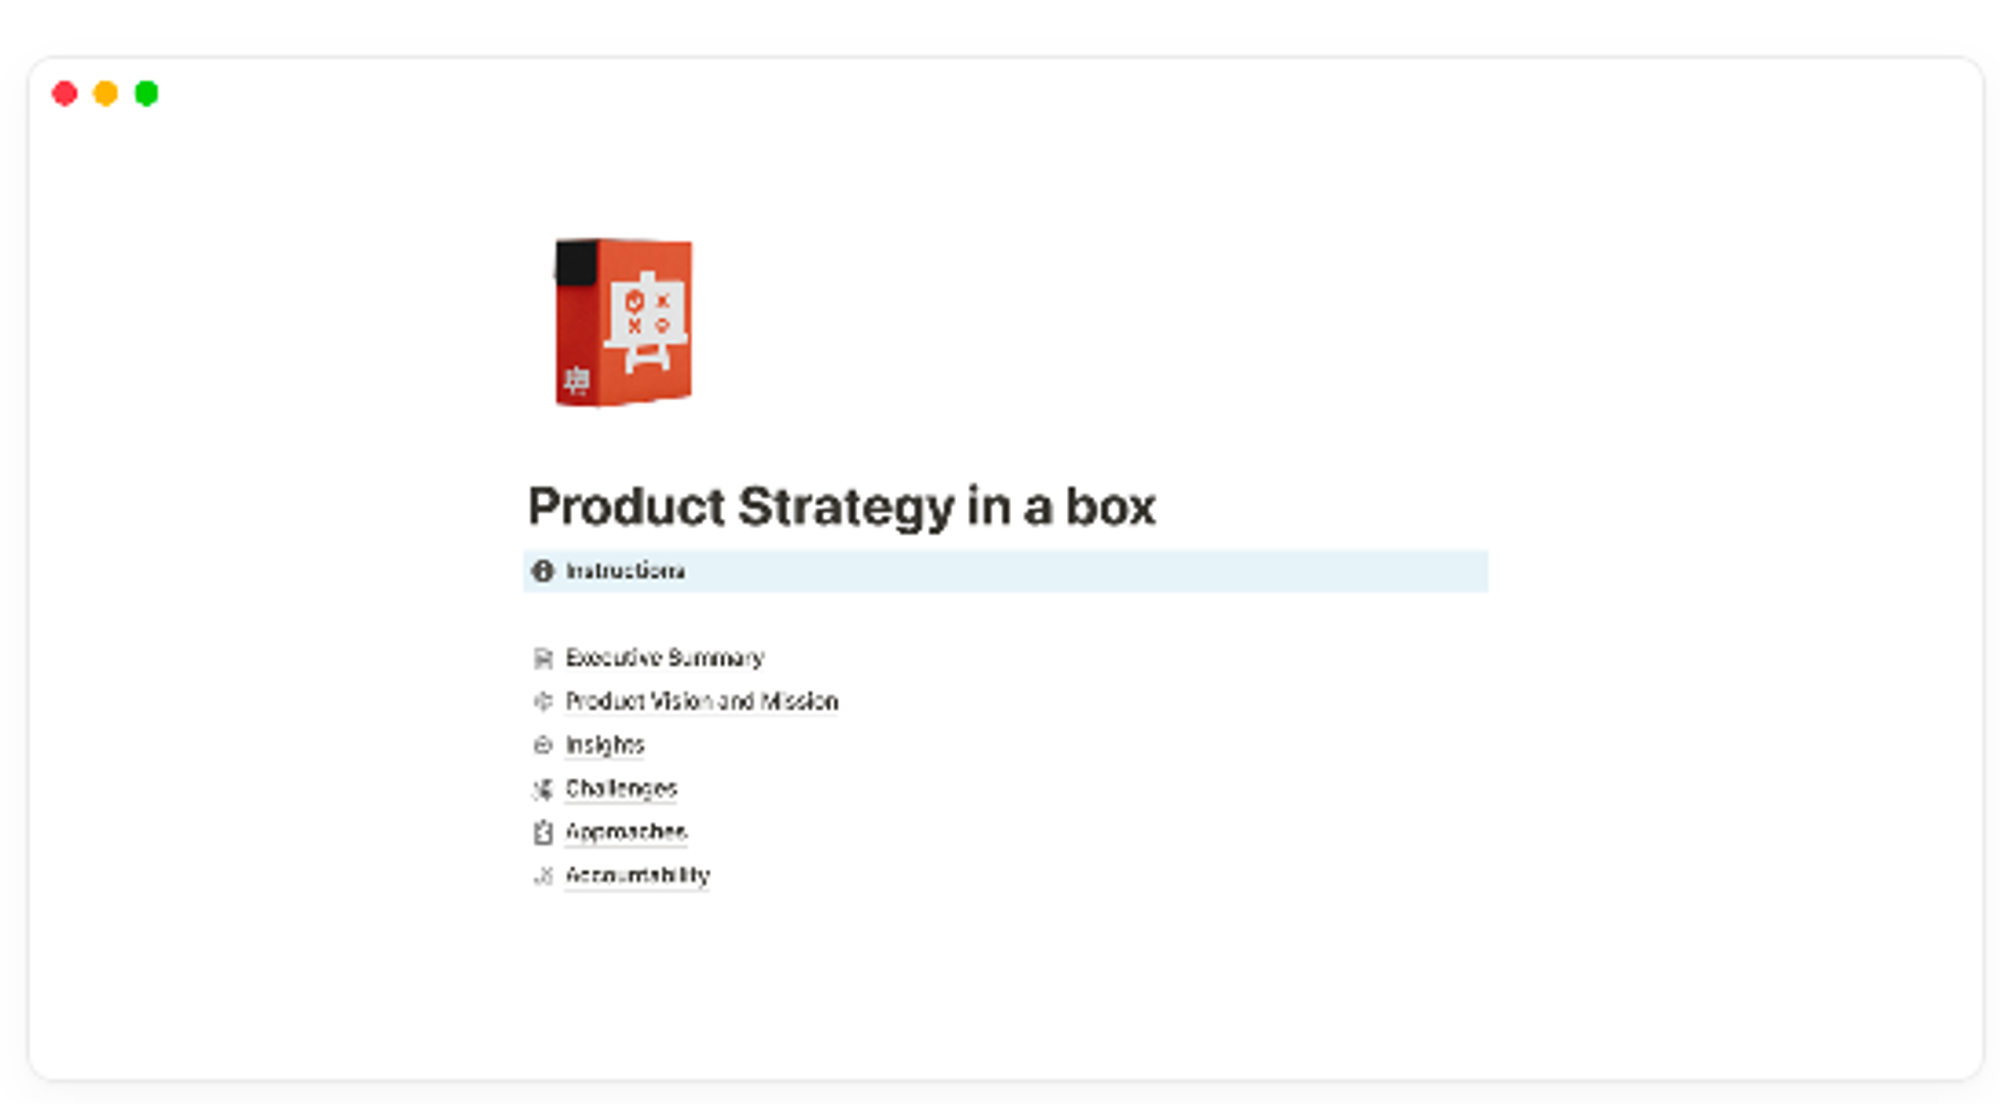 Product Strategy in a box